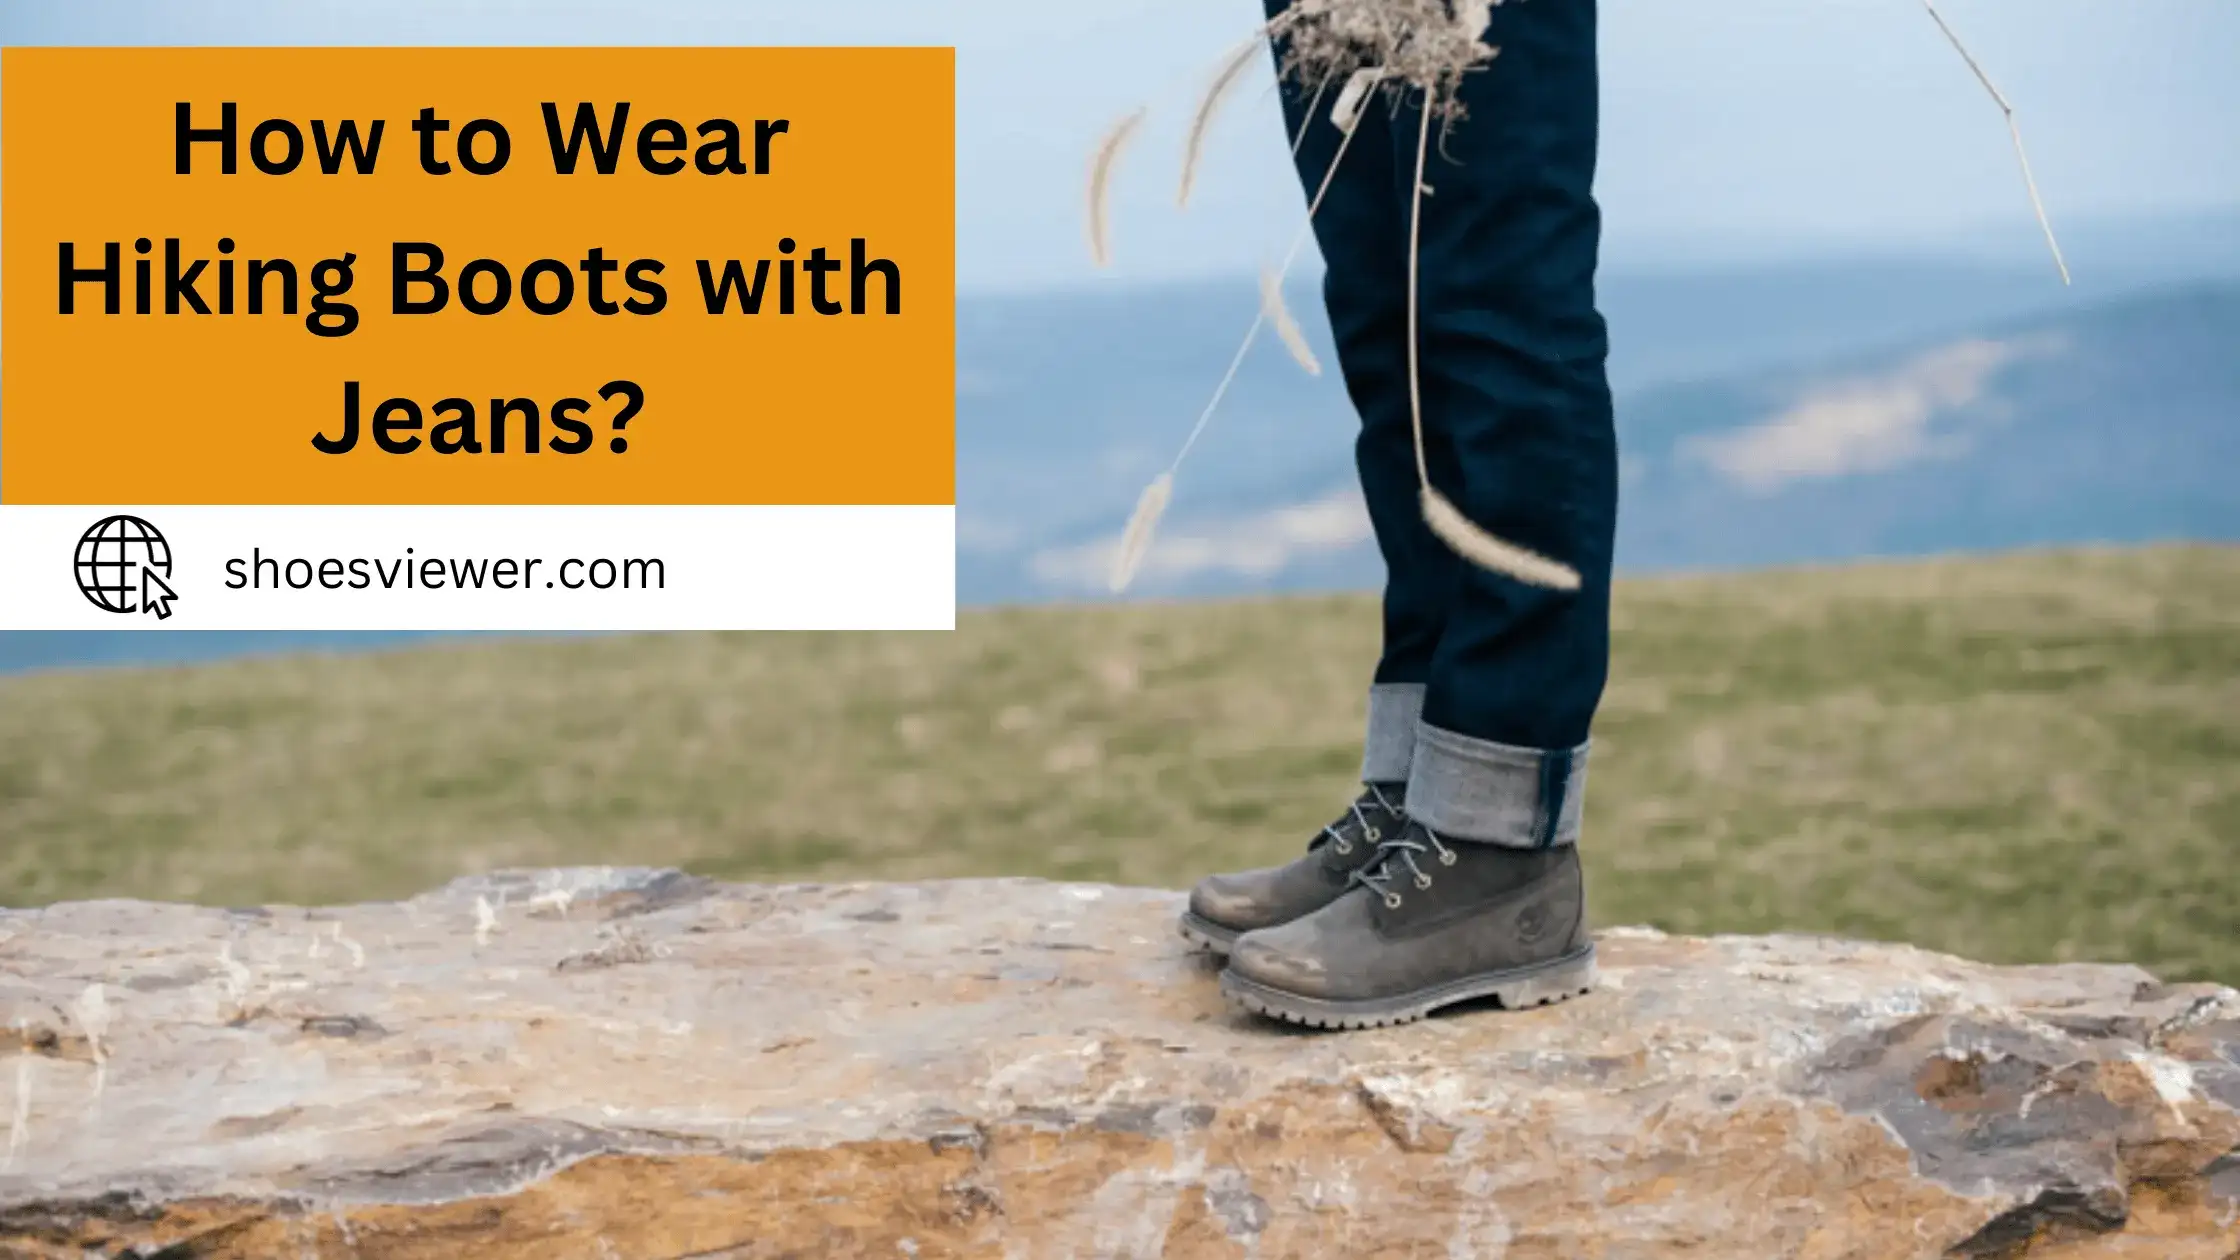 How To Wear Hiking Boots With Jeans? Complete Guide